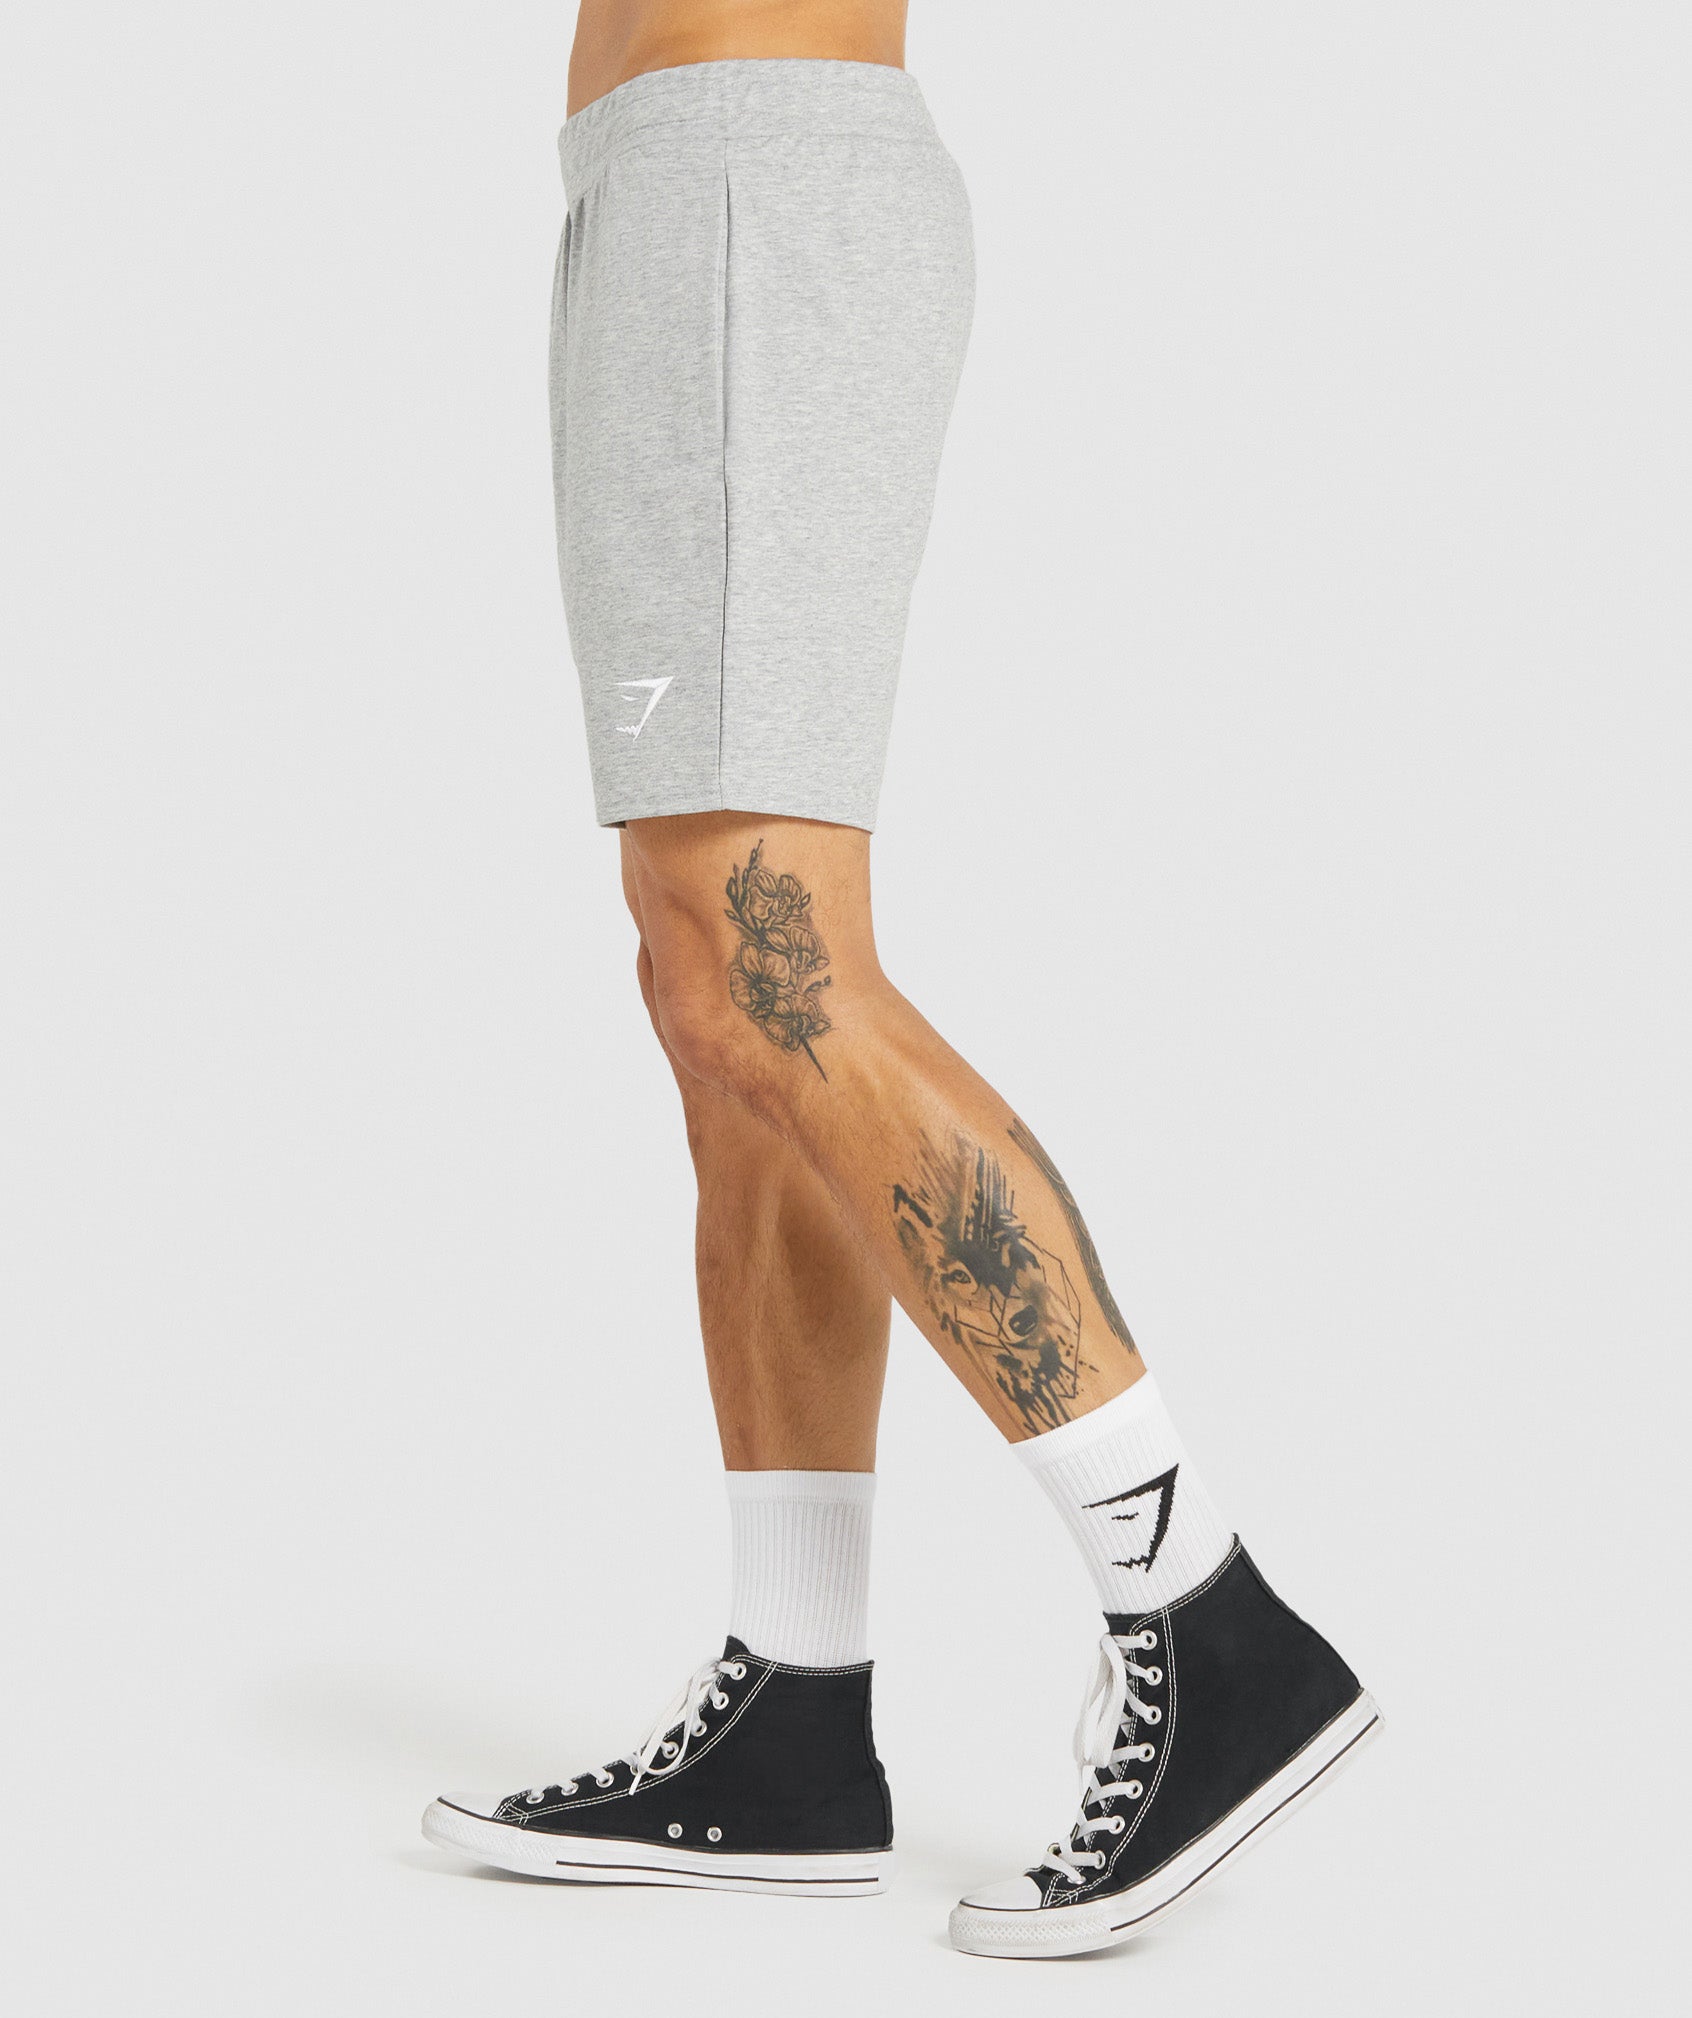 Critical 7" Shorts in Light Grey Core Marl - view 3